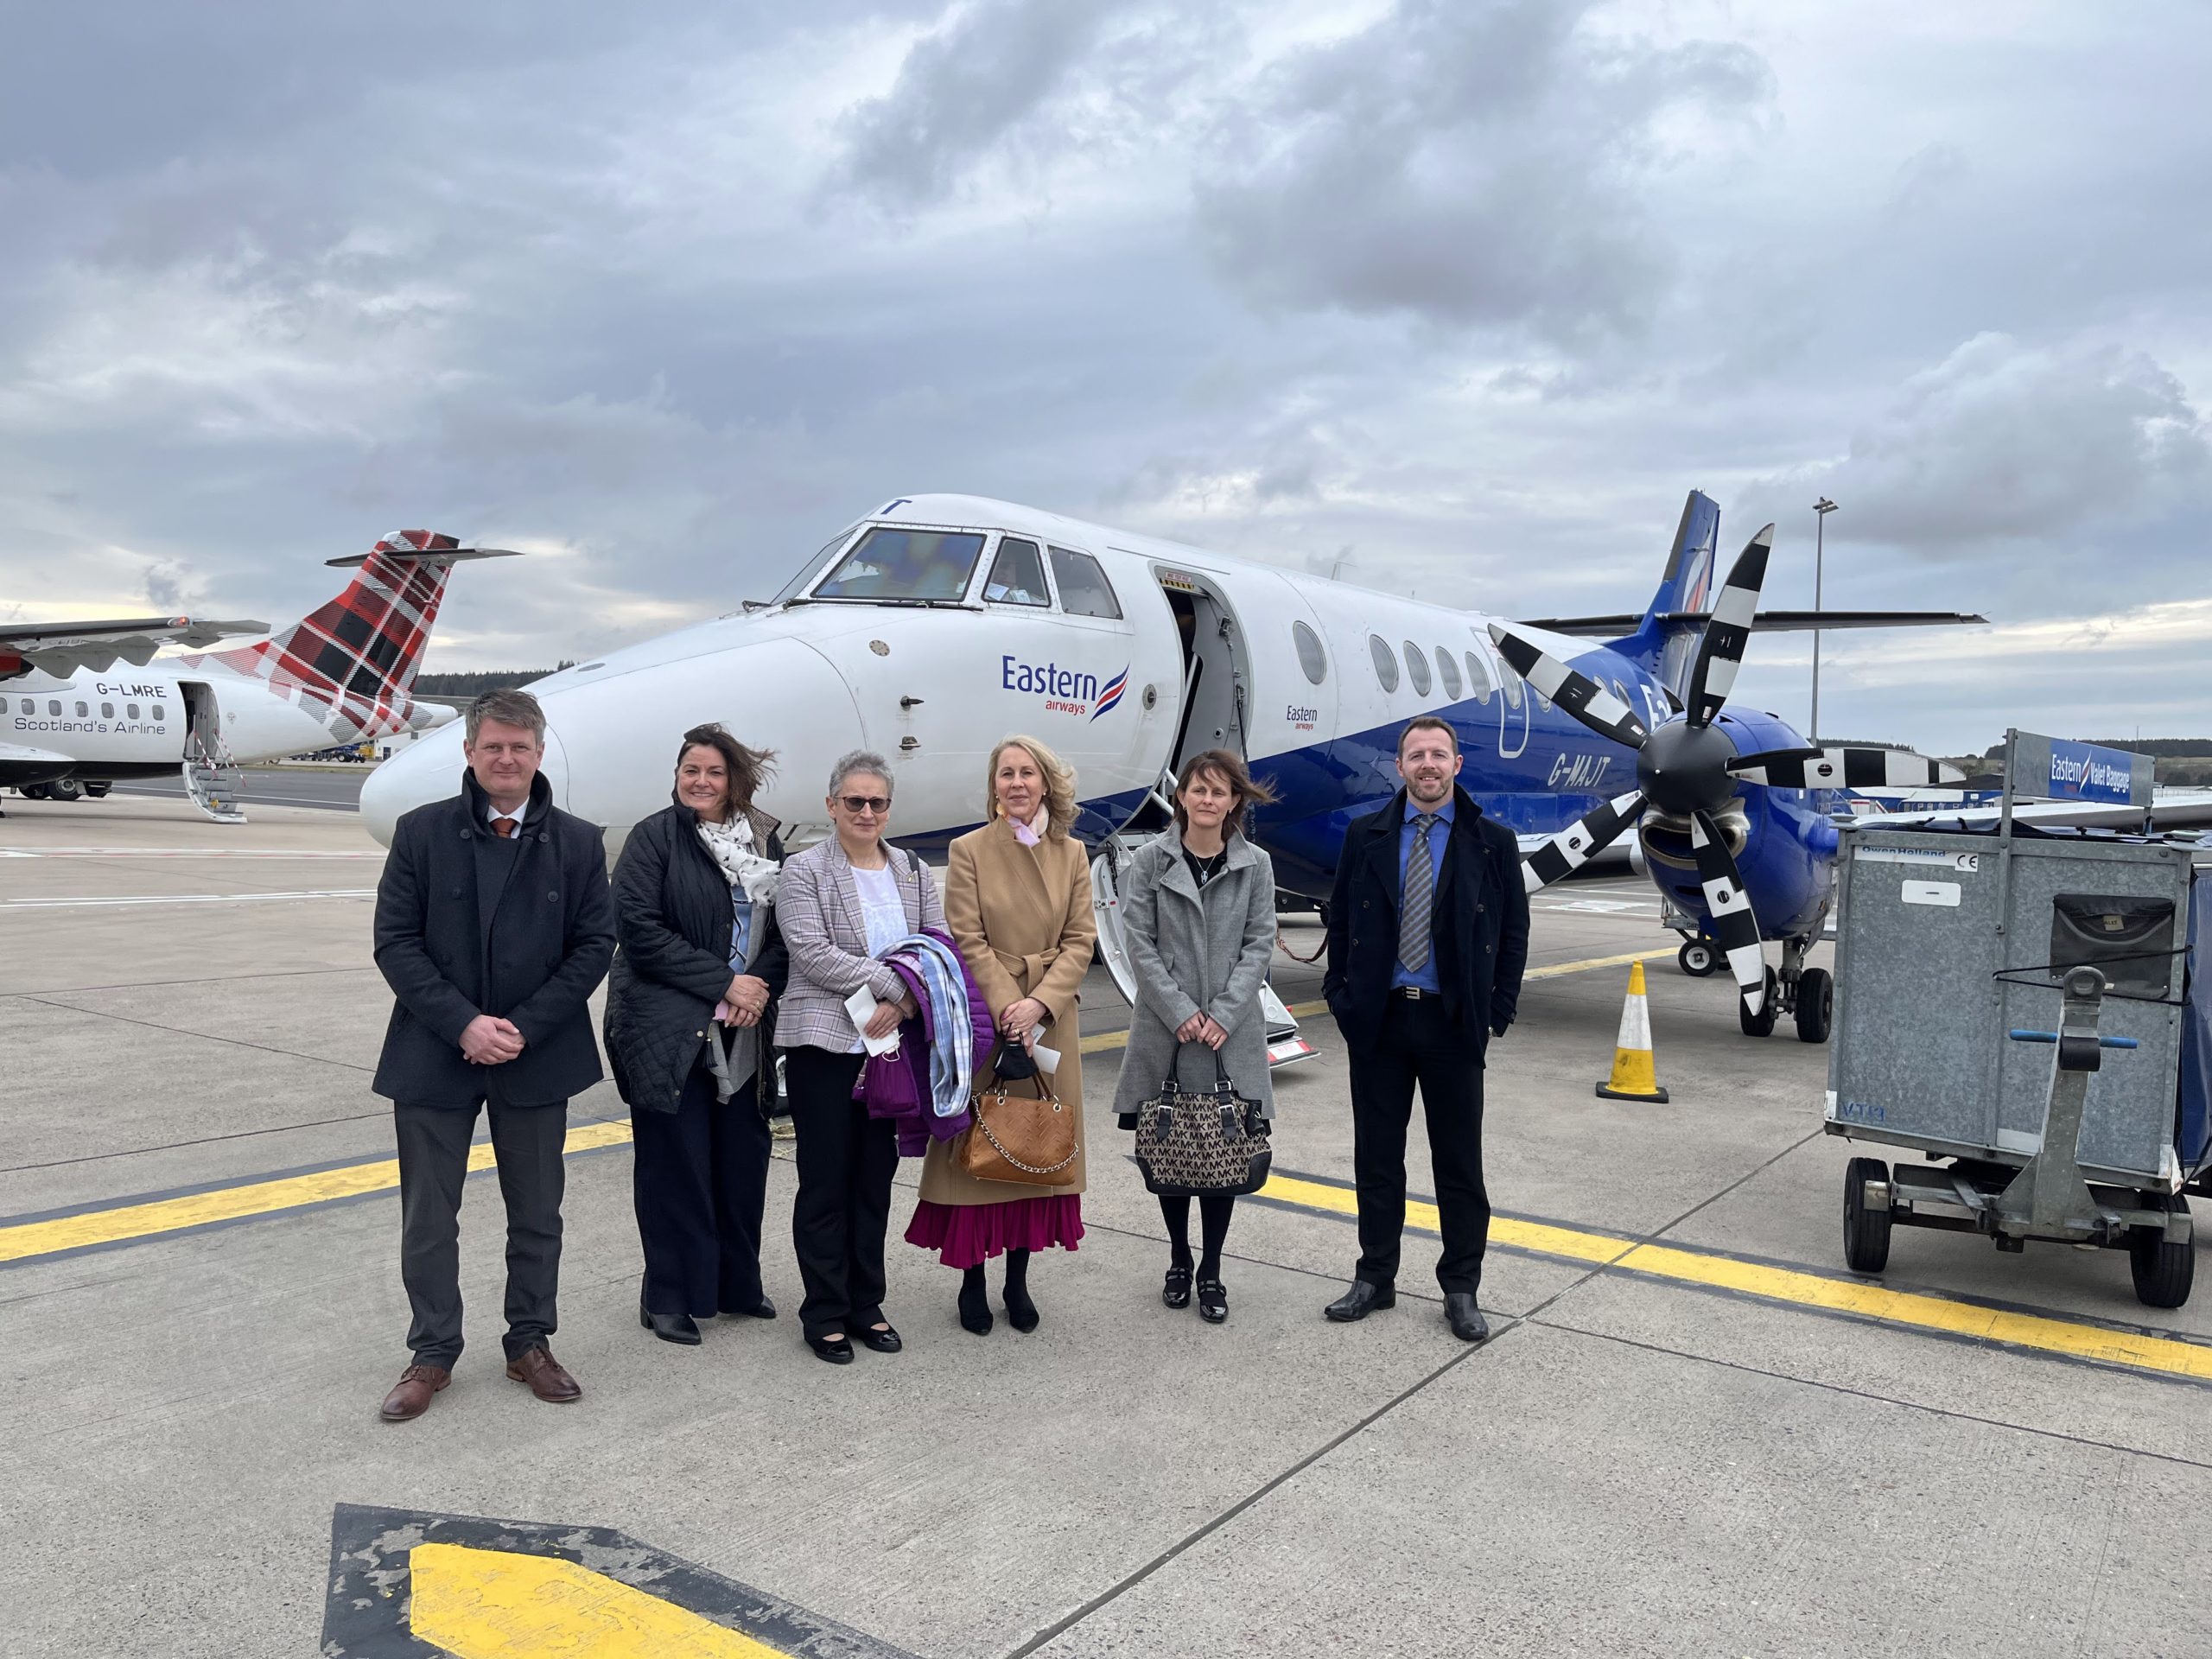 From left to right. Dougie Cook, North Airports General Manager, Lorna Jack, Chair of Highlands and Islands Airports ltd, Trudy Morris, CEO Caithness Chamber of Commerce, Ellie Lamont, Vice Chair of Venture North, Louise Sinclair, Vice Chair of Caithness Chamber of Commerce and Gordon Duncan, Highland Council